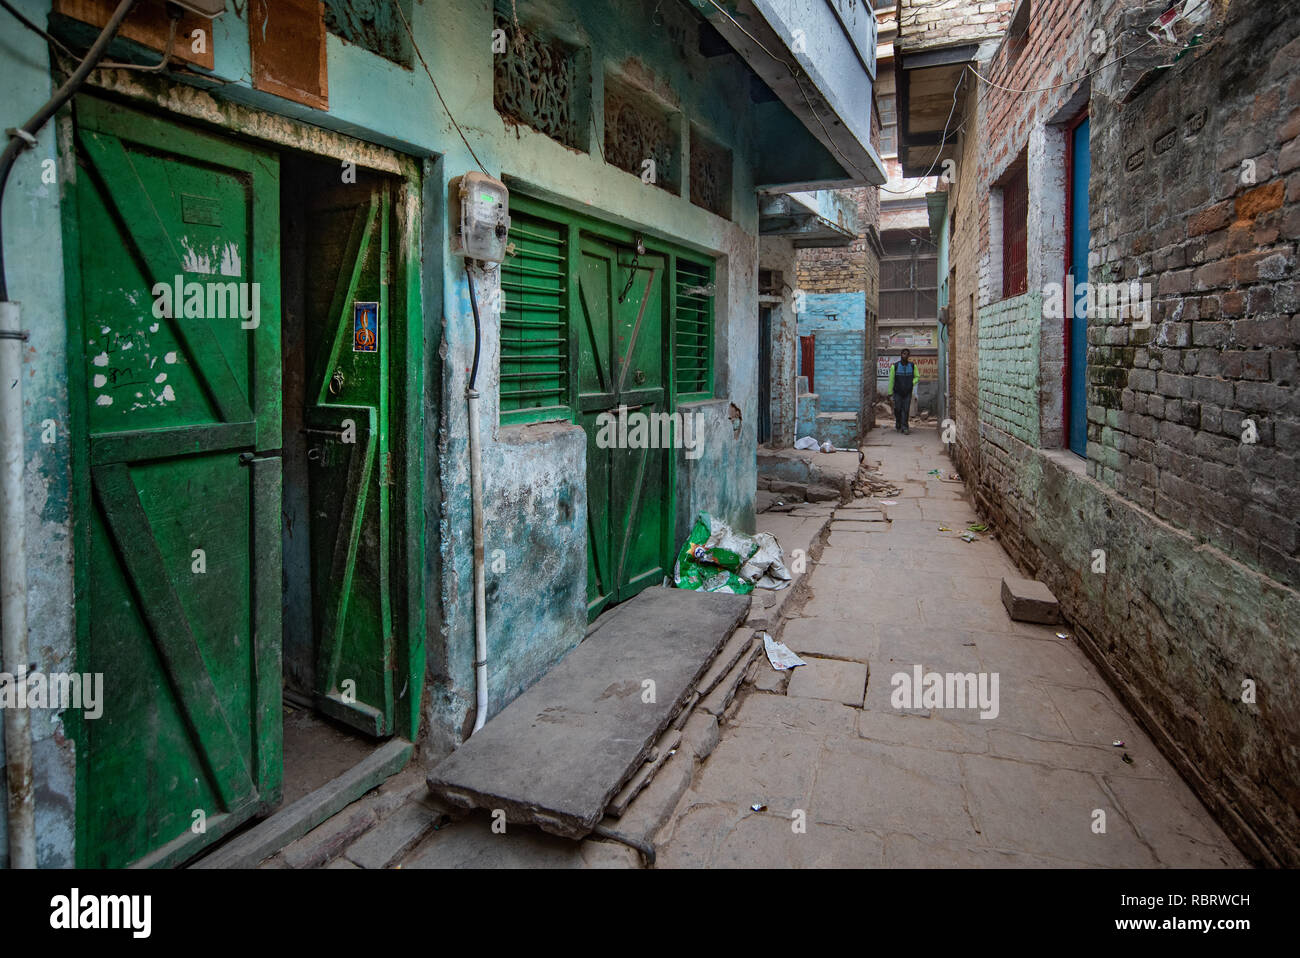 A narrow and organic street in Varanasi, India with green coloured doors to one side and a brick wall opposite. Stock Photo